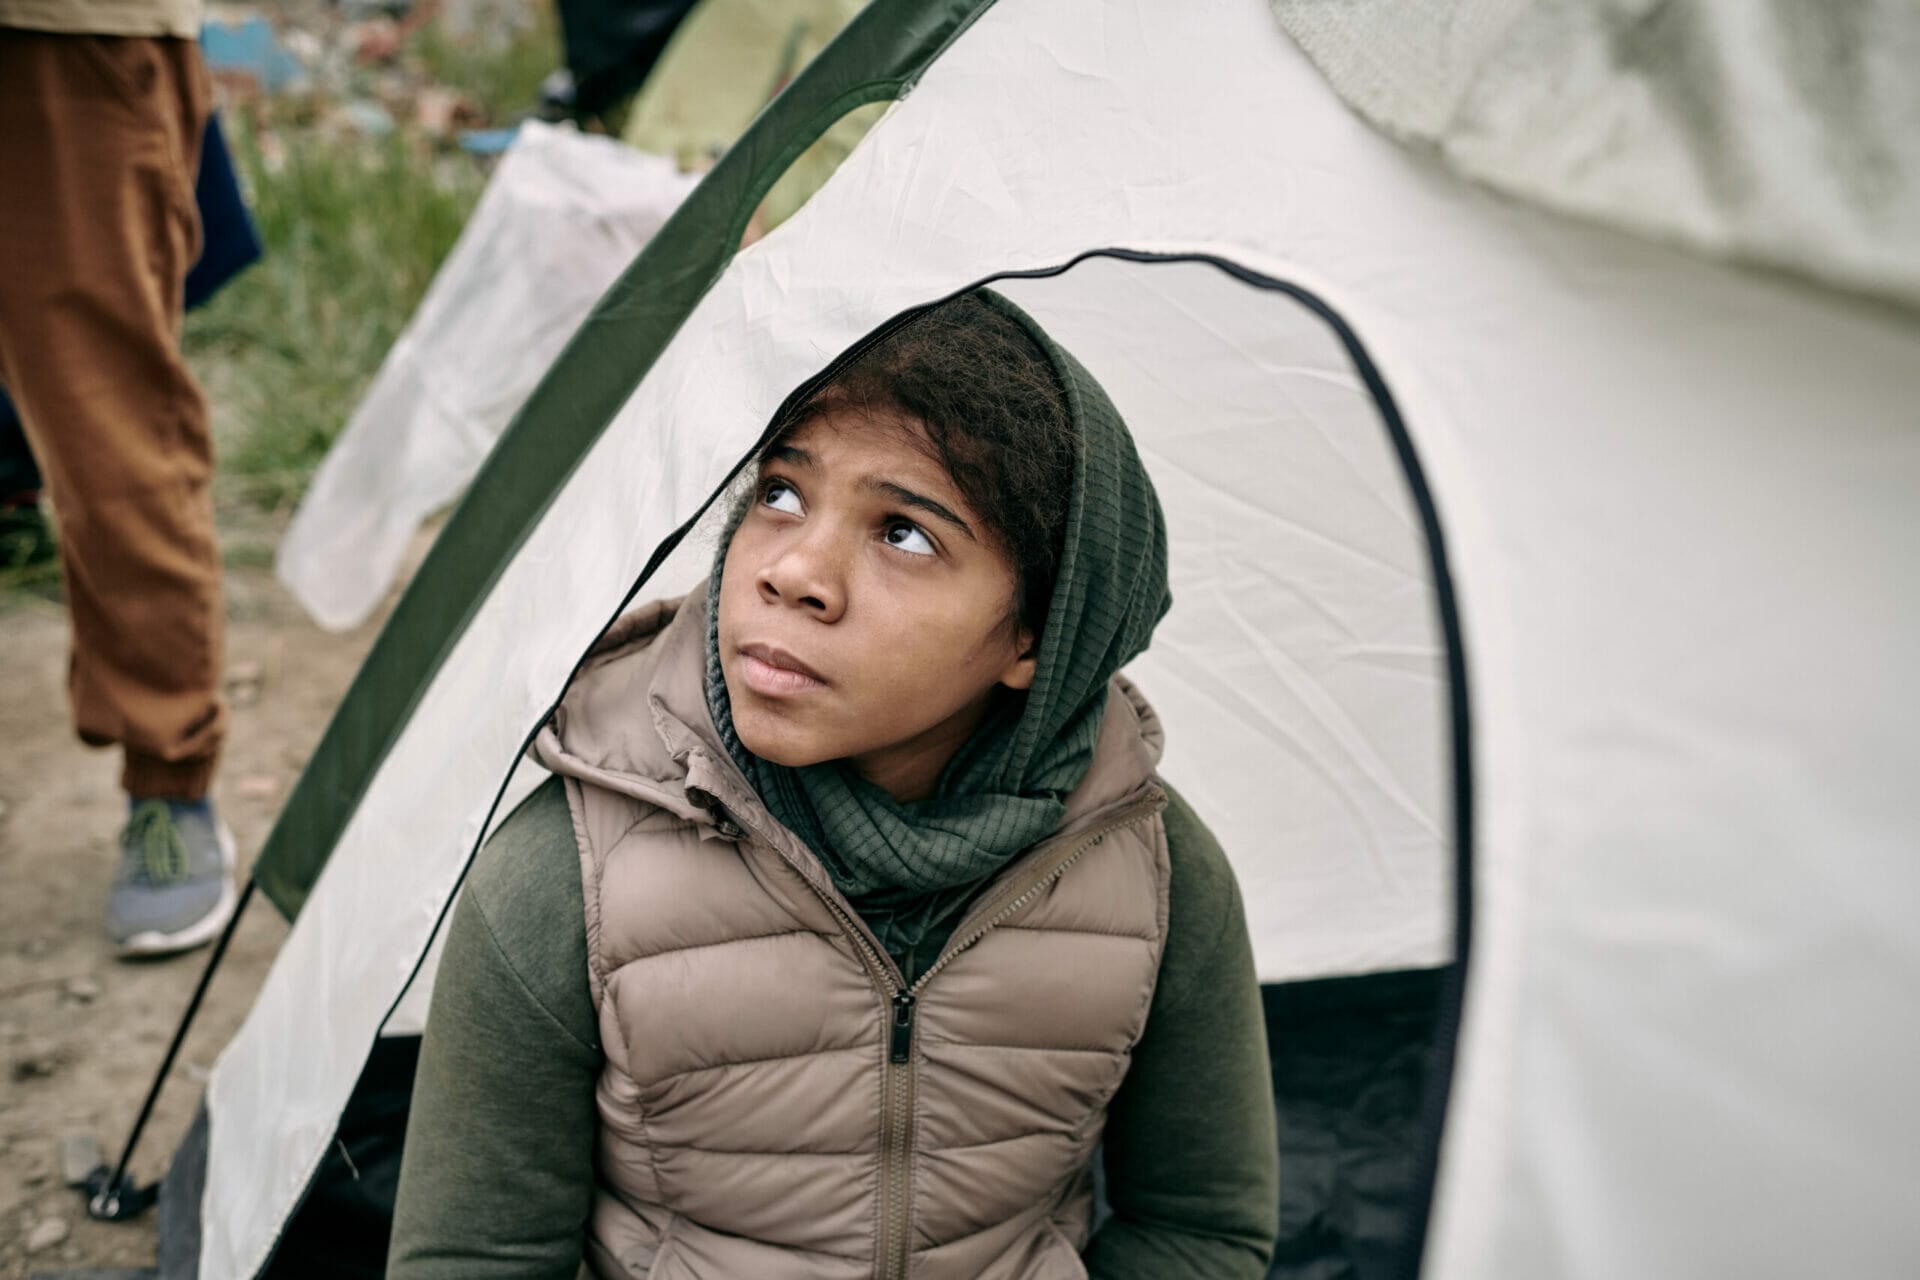 Serious homeless refugee middle-eastern girl in headscarf and vest sitting inside of tent and looking up hopefully